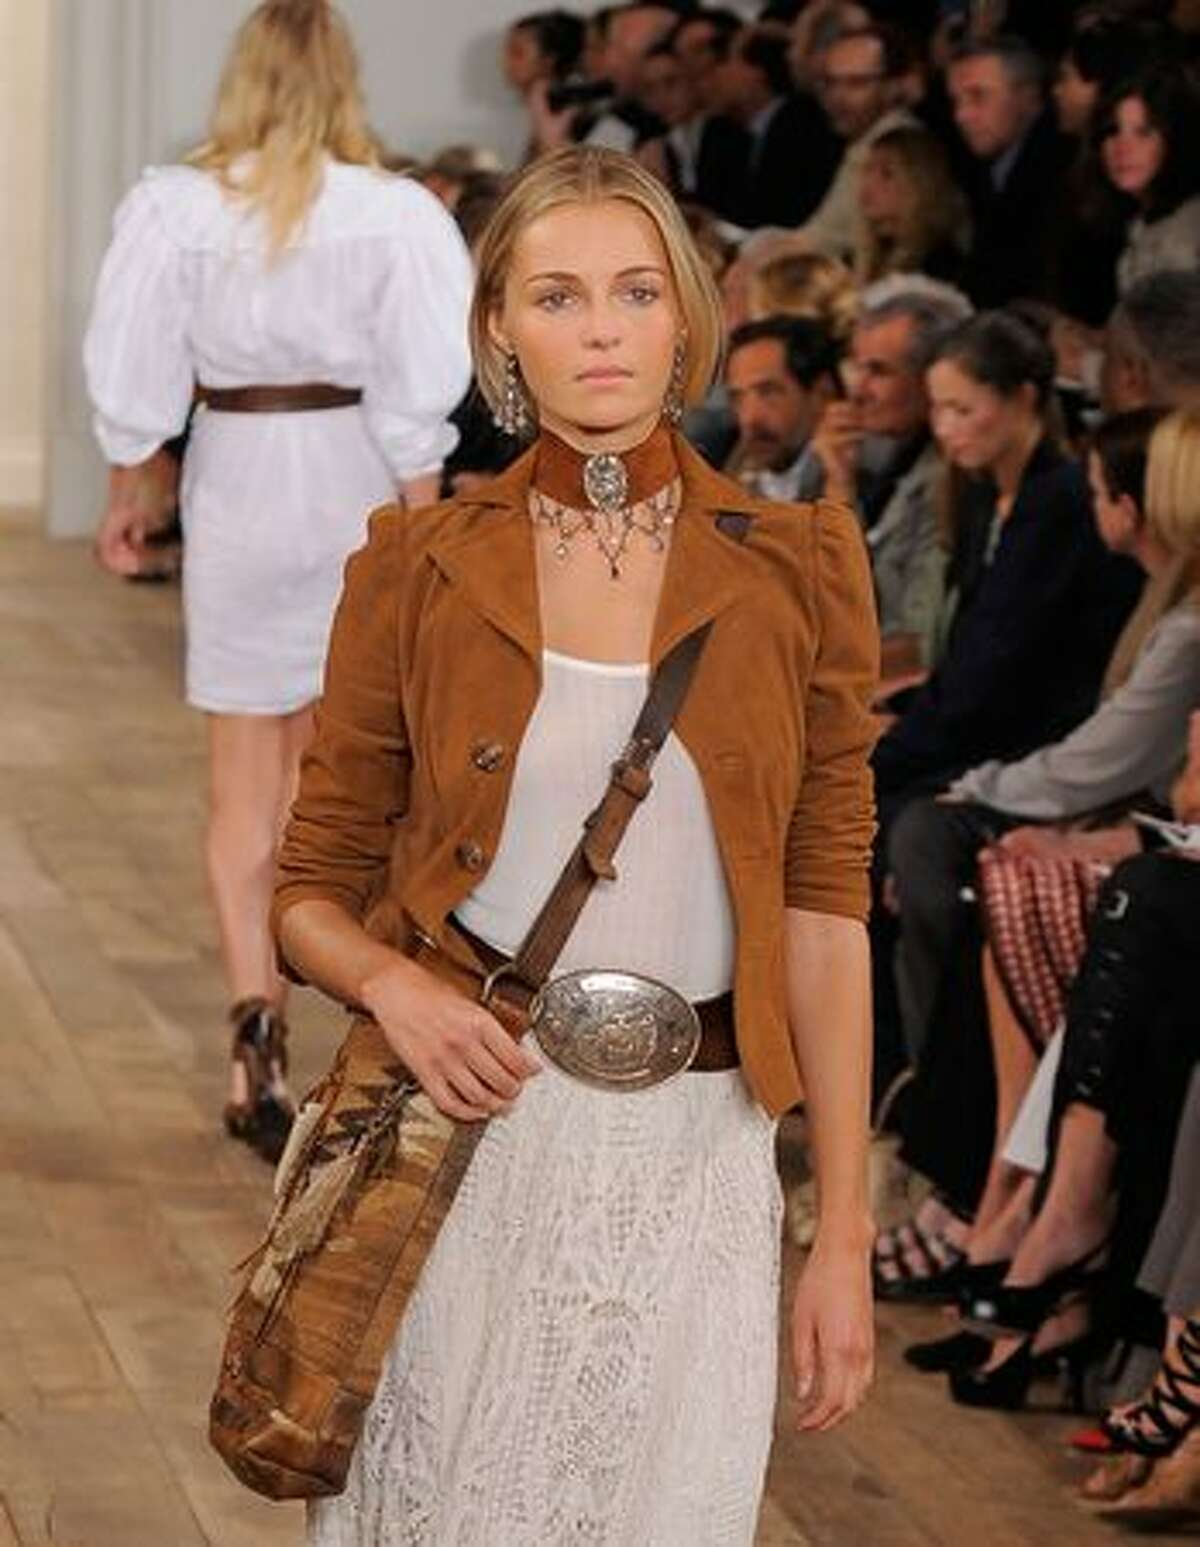 A model walks the runway at the Ralph Lauren Spring 2011 fashion show during Mercedes-Benz Fashion Week in New York City.